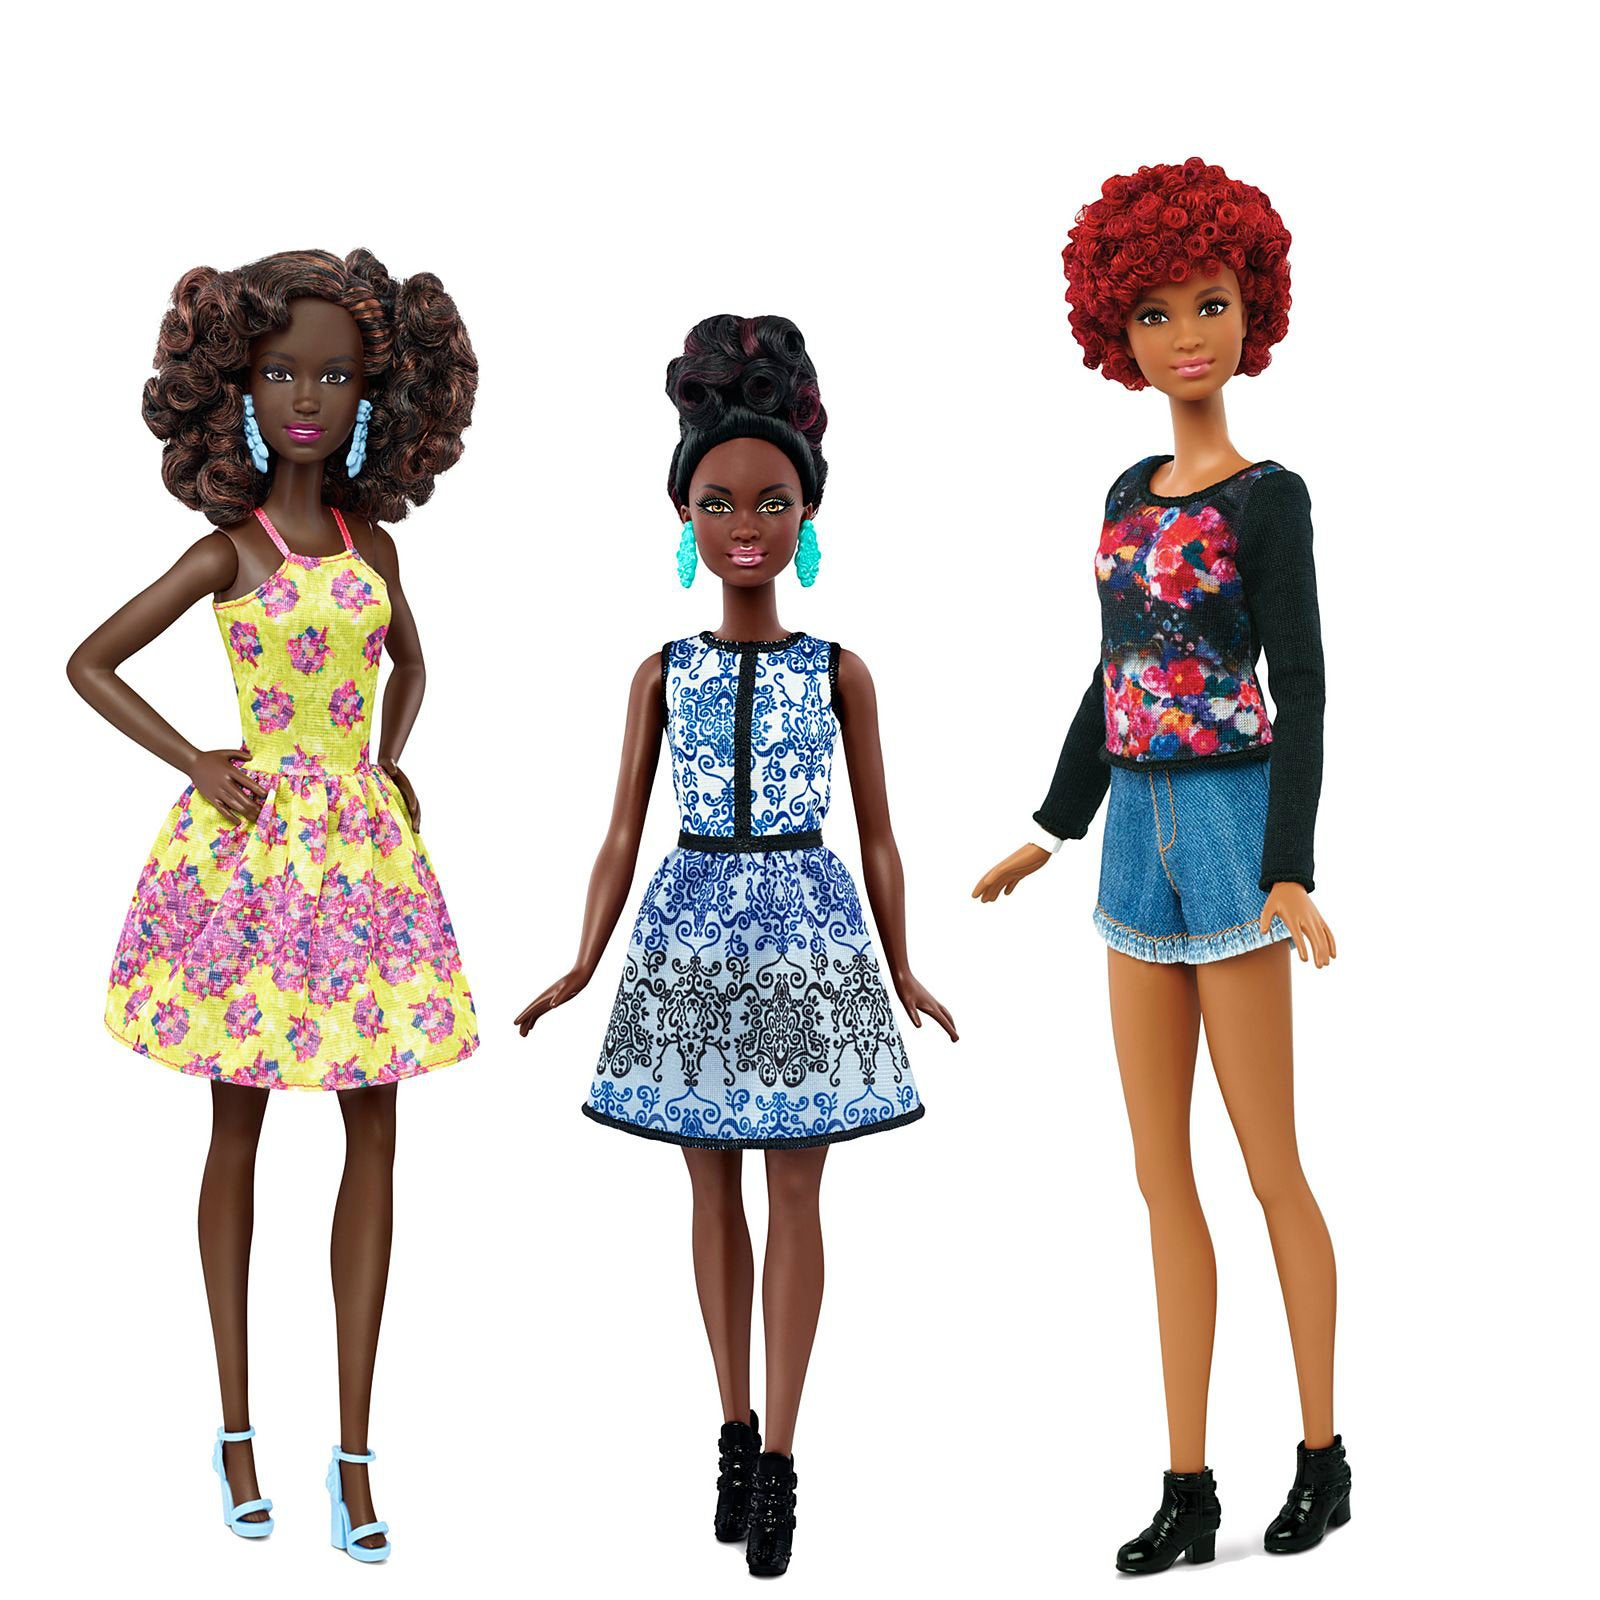 Mattel Introduces a New Line of Diverse Ken Dolls—Cornrows Included
